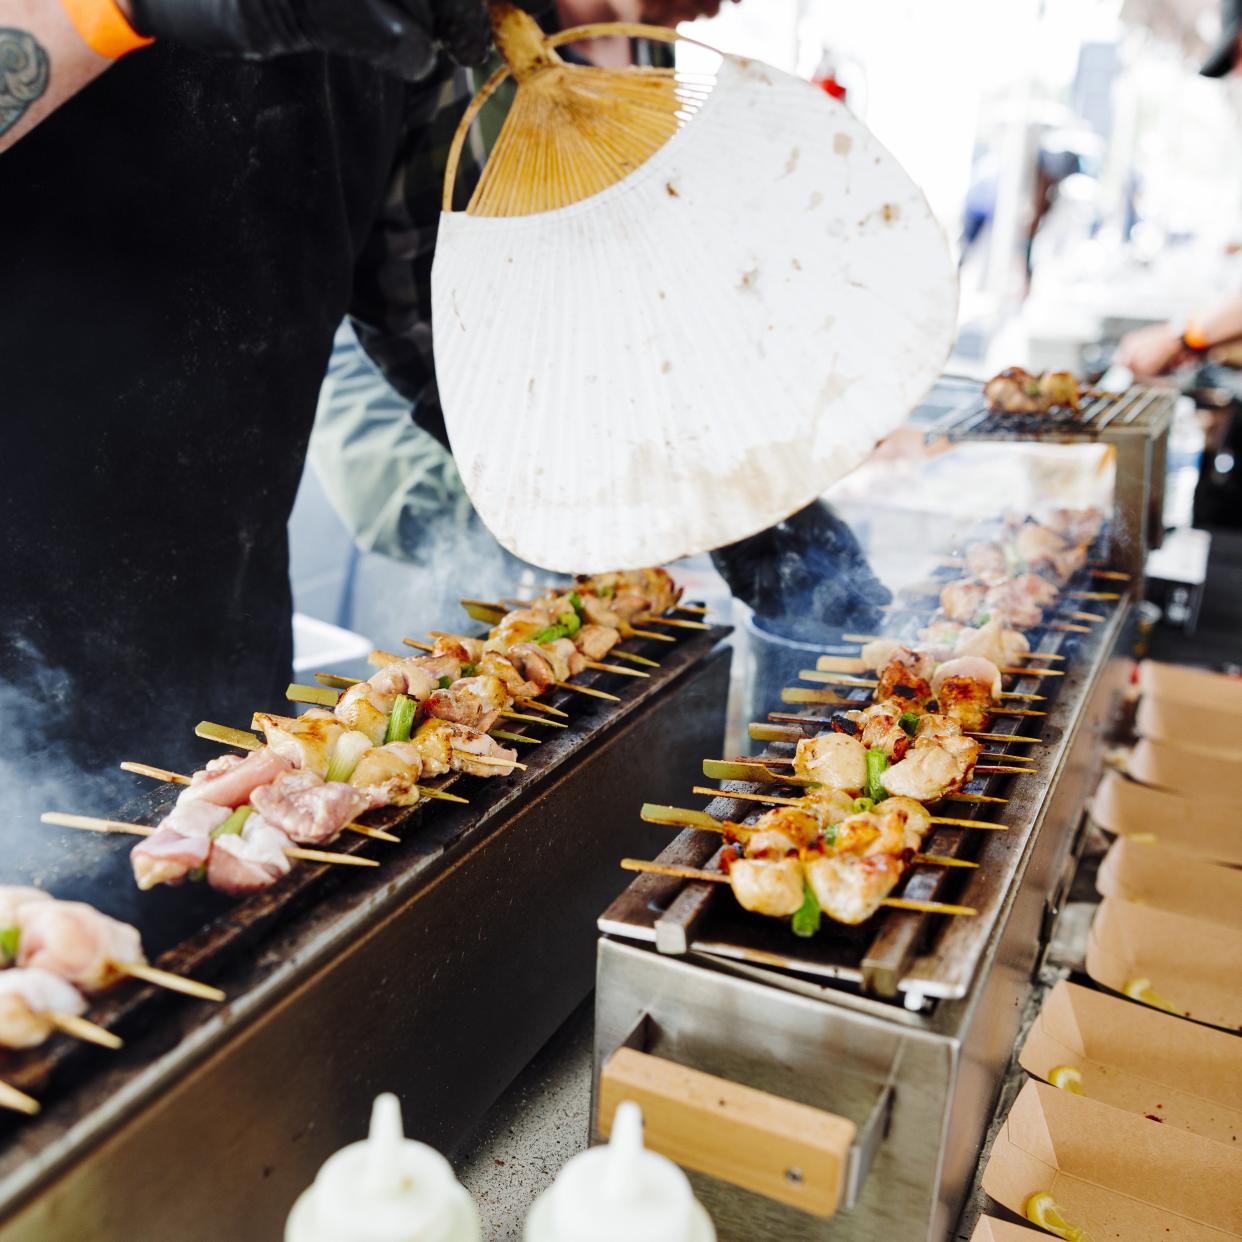 Circle Pit BBQ prepares yakitori, or Japanese style grilled chicken, at Feast Wilmington.